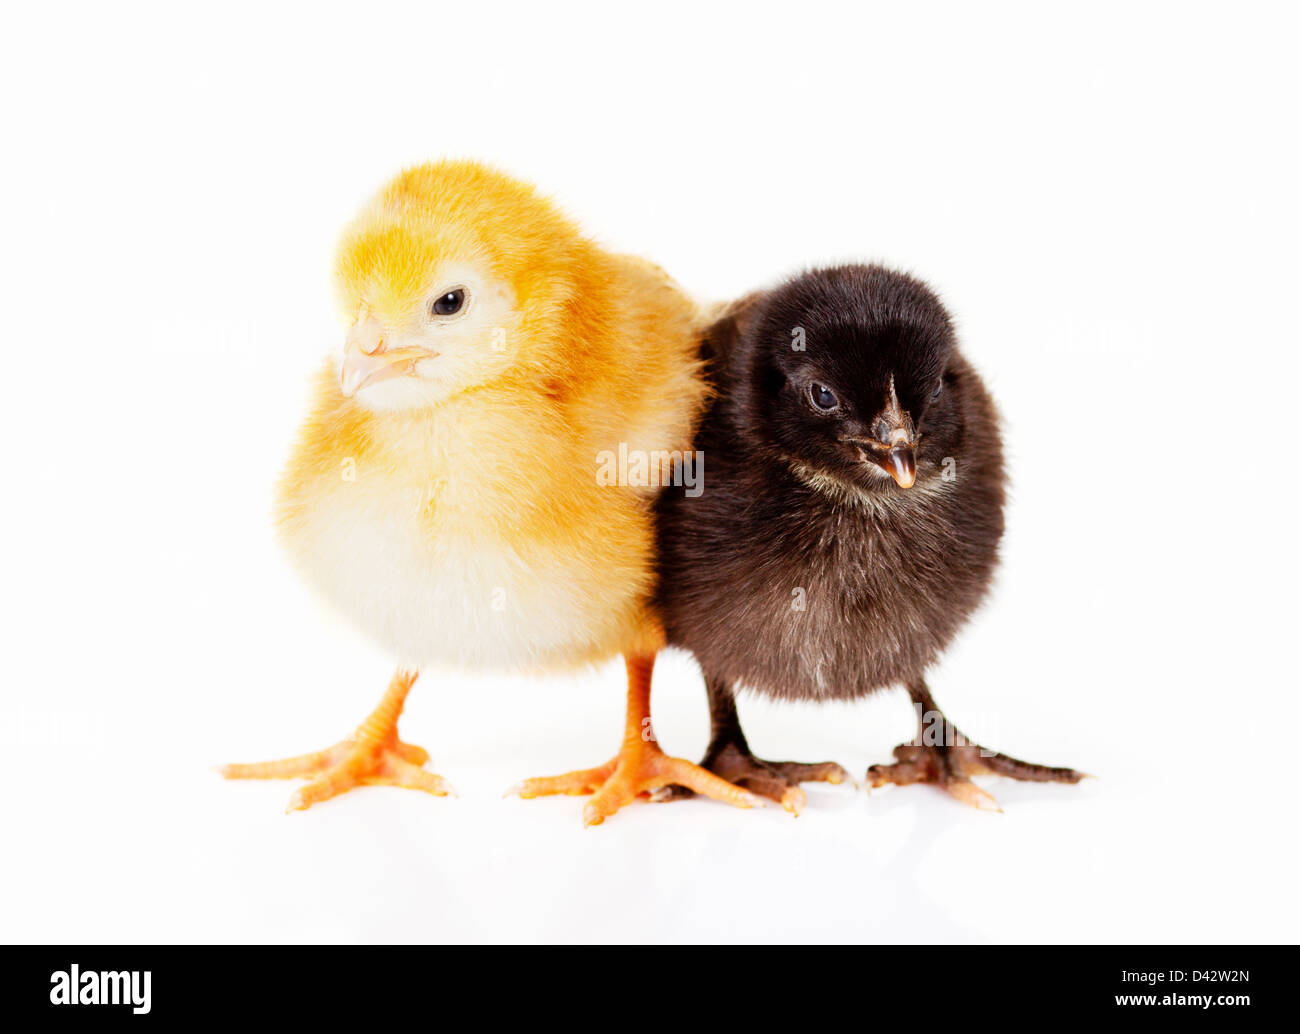 Cute yellow and black fluffy baby chickens on isolated background Stock Photo